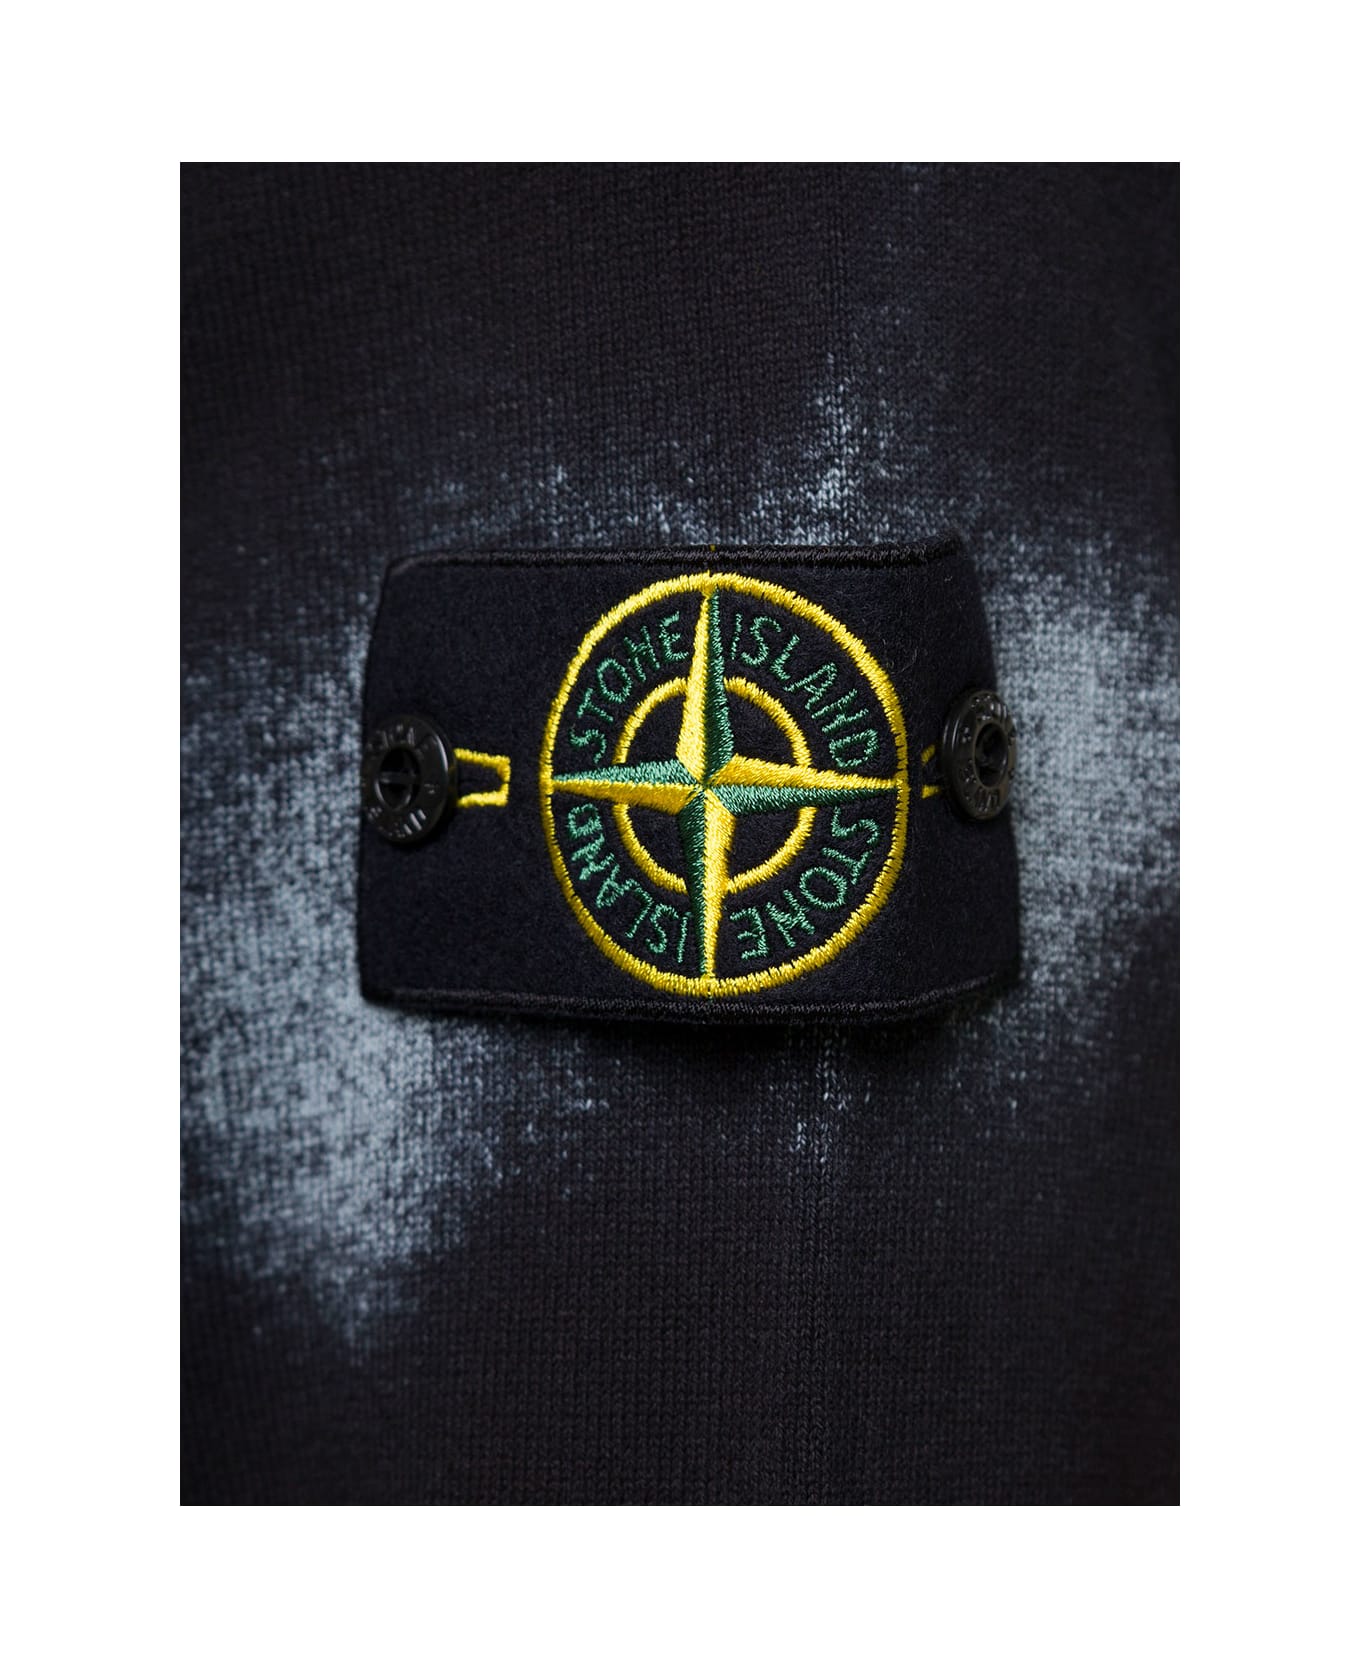 Stone Island Black Crewneck Sweatshirt With Logo Patch And Fade Effect In Cotton Man - Black